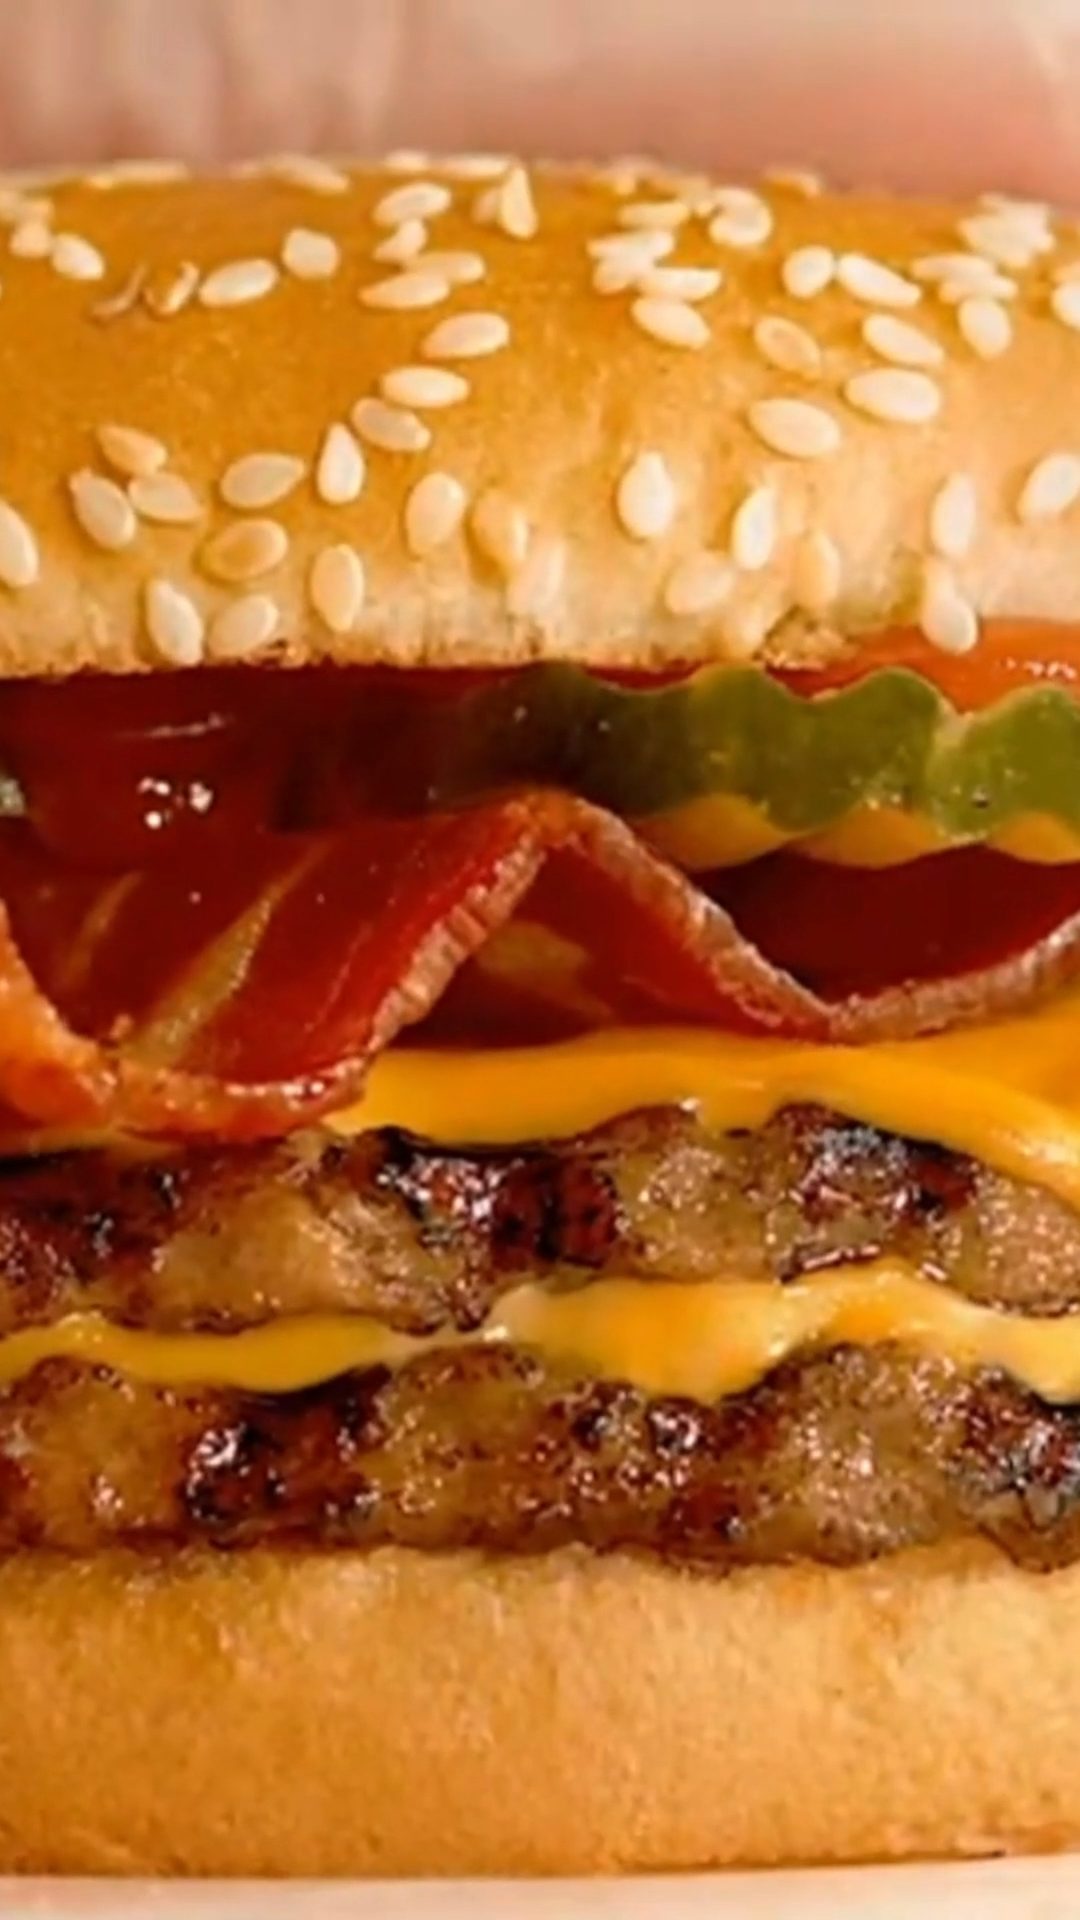 Get-Free-Burger-King-For-Life-Time-With-VIP-Card-1-poster